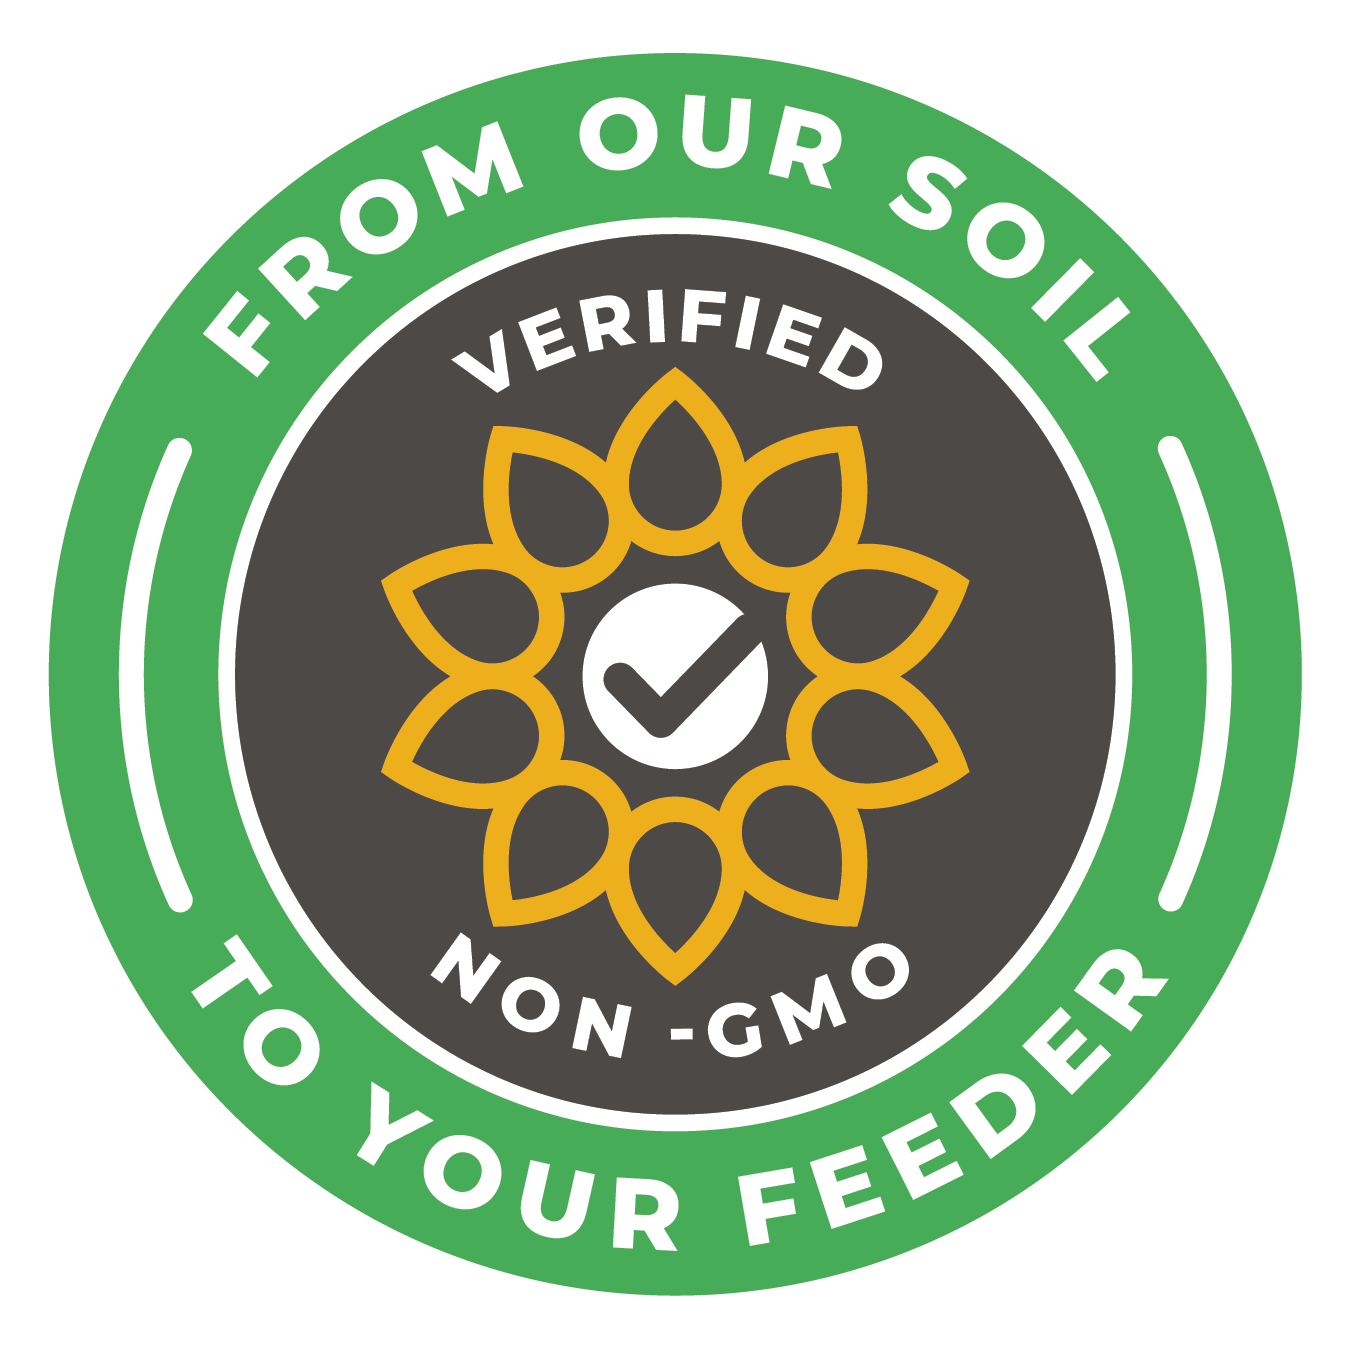 Resaca is Non GMO Project Verified